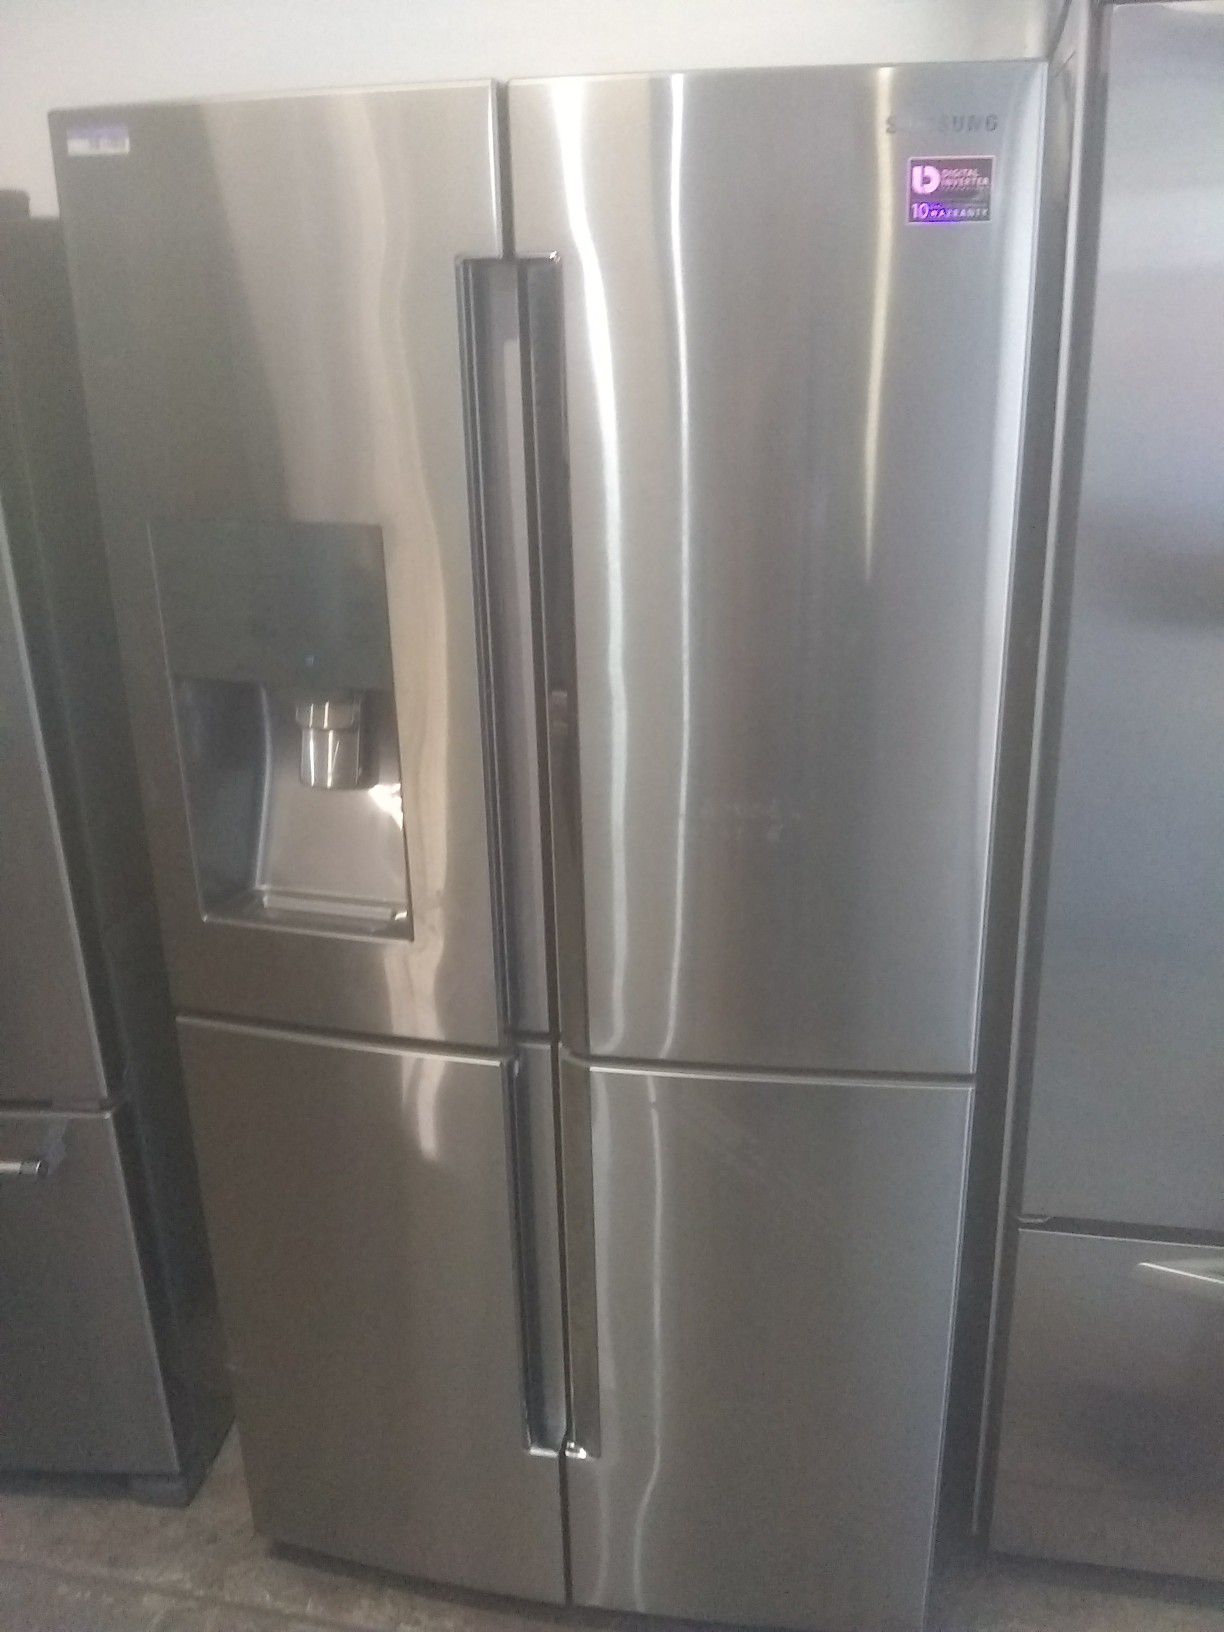 Samsung stainless steel french4 door refrigerator home and kitchen appliances